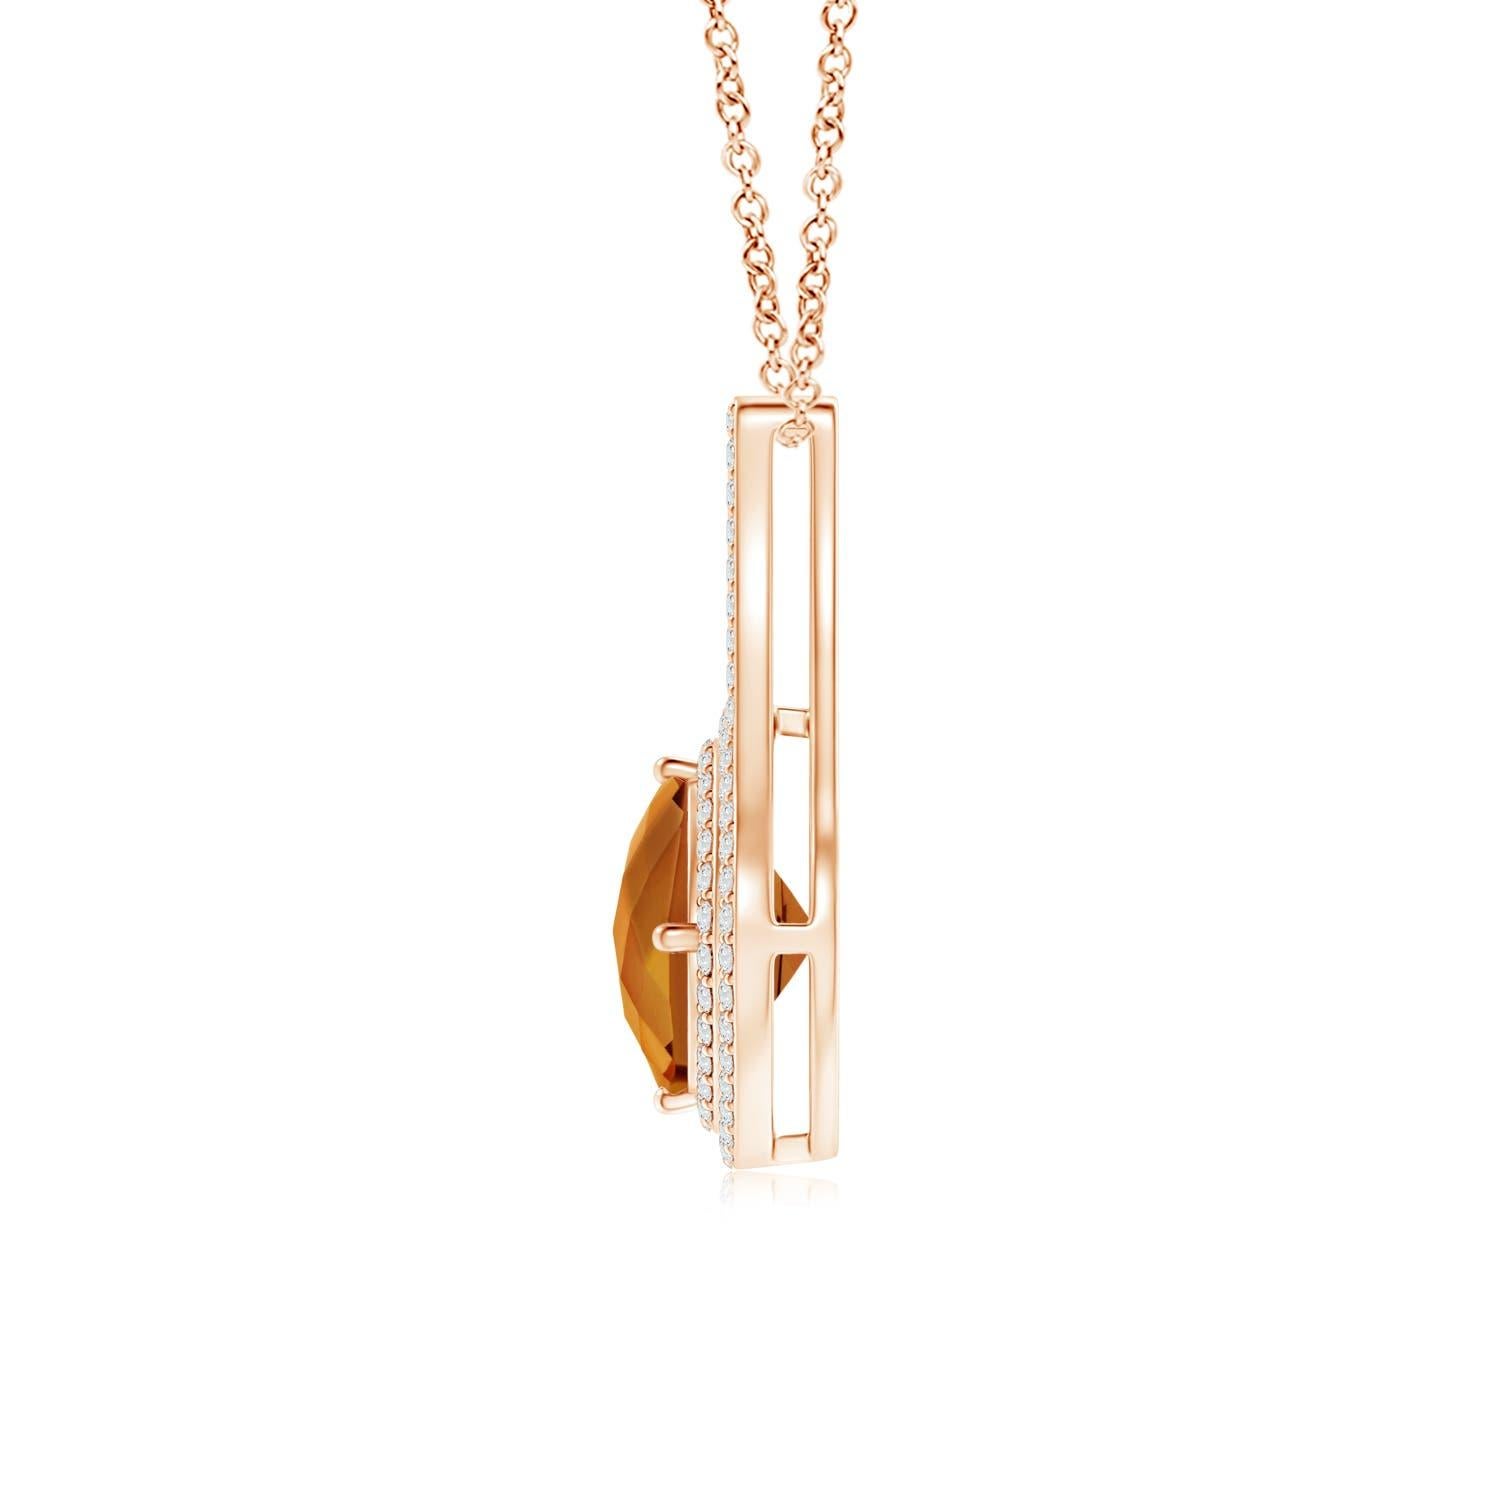 This splendid 14K Rose Gold pendant is designed with a dazzling inverted V-bale. It features a stunning GIA certified cushion yellowish orange zircon that is prong-set sideways and illuminated by a double halo of shimmering diamonds.
